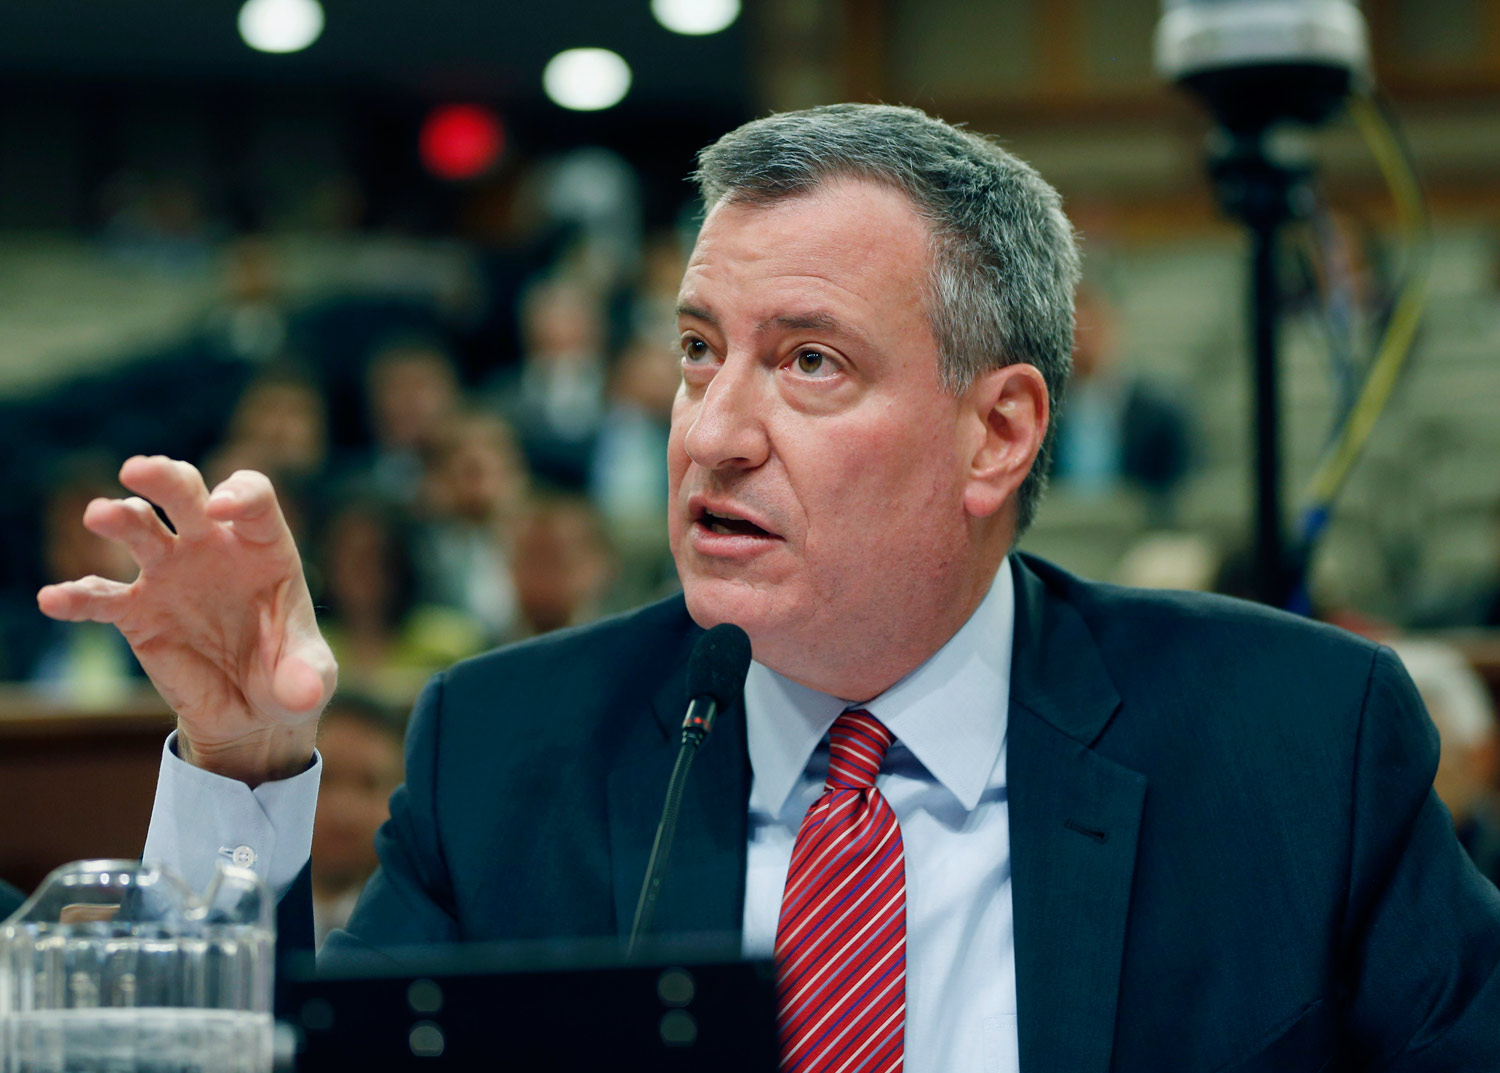 Bill de Blasio Is Wrong to Pander to AIPAC